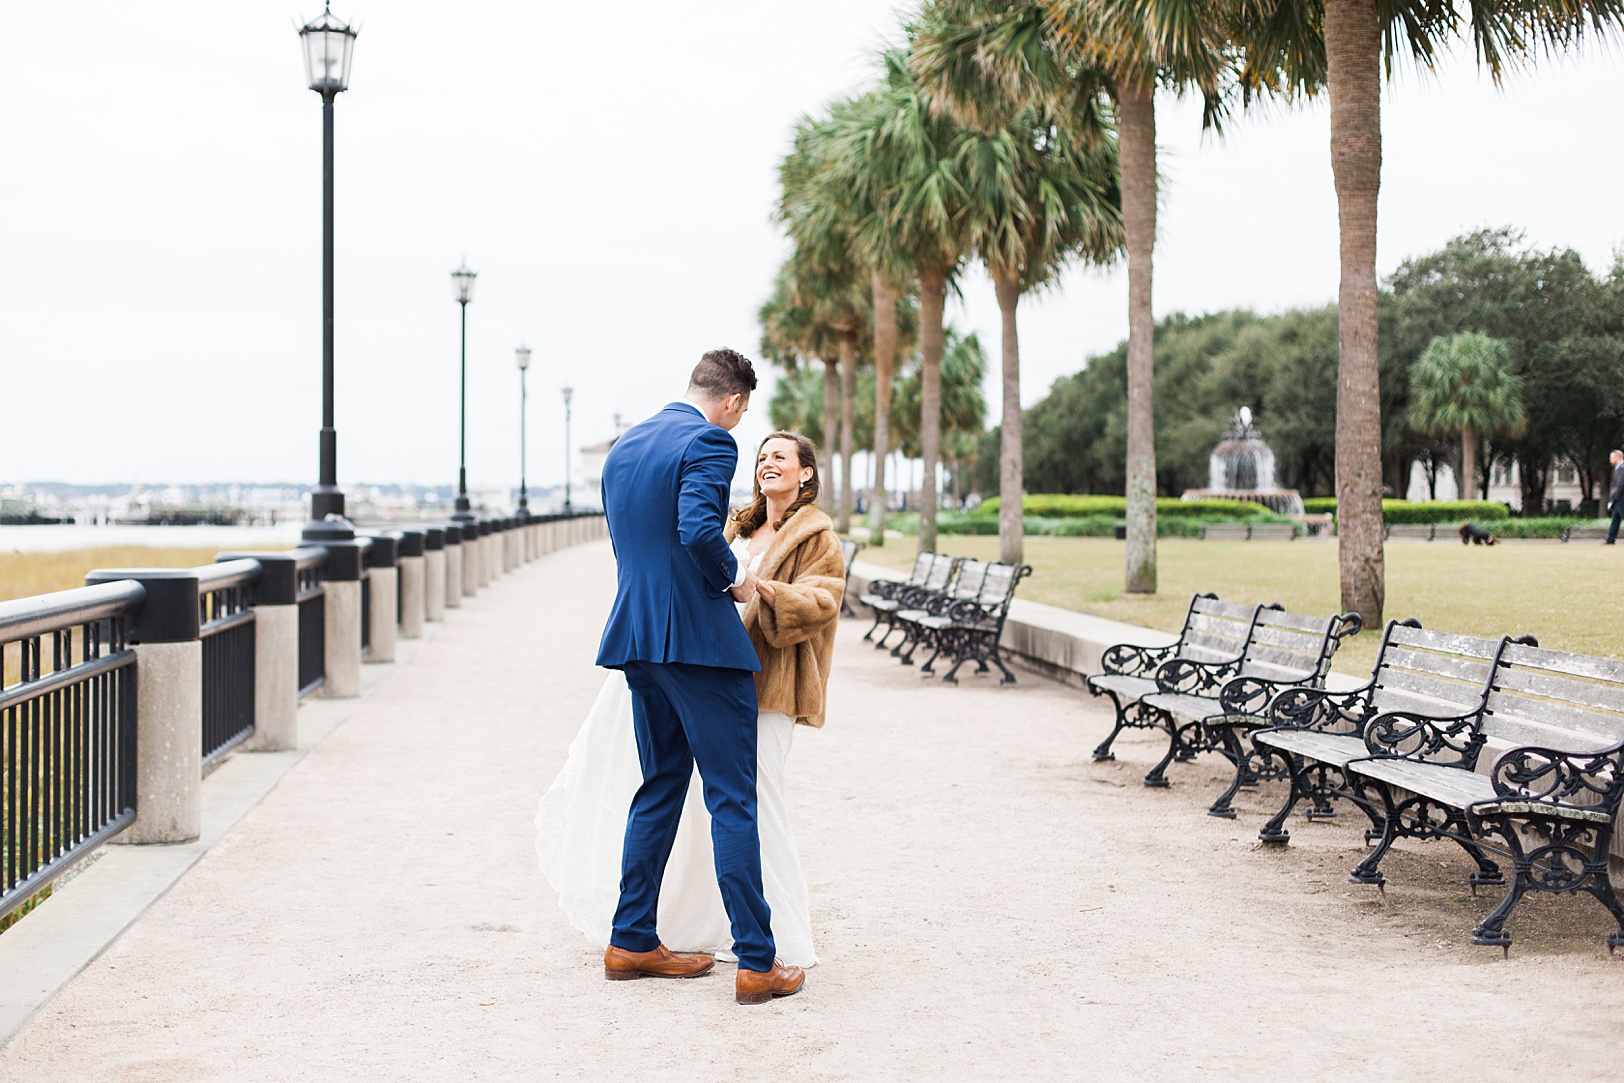 Bride and Groom Candid Pictures in Waterfront Park | Kaitlin Scott Photography